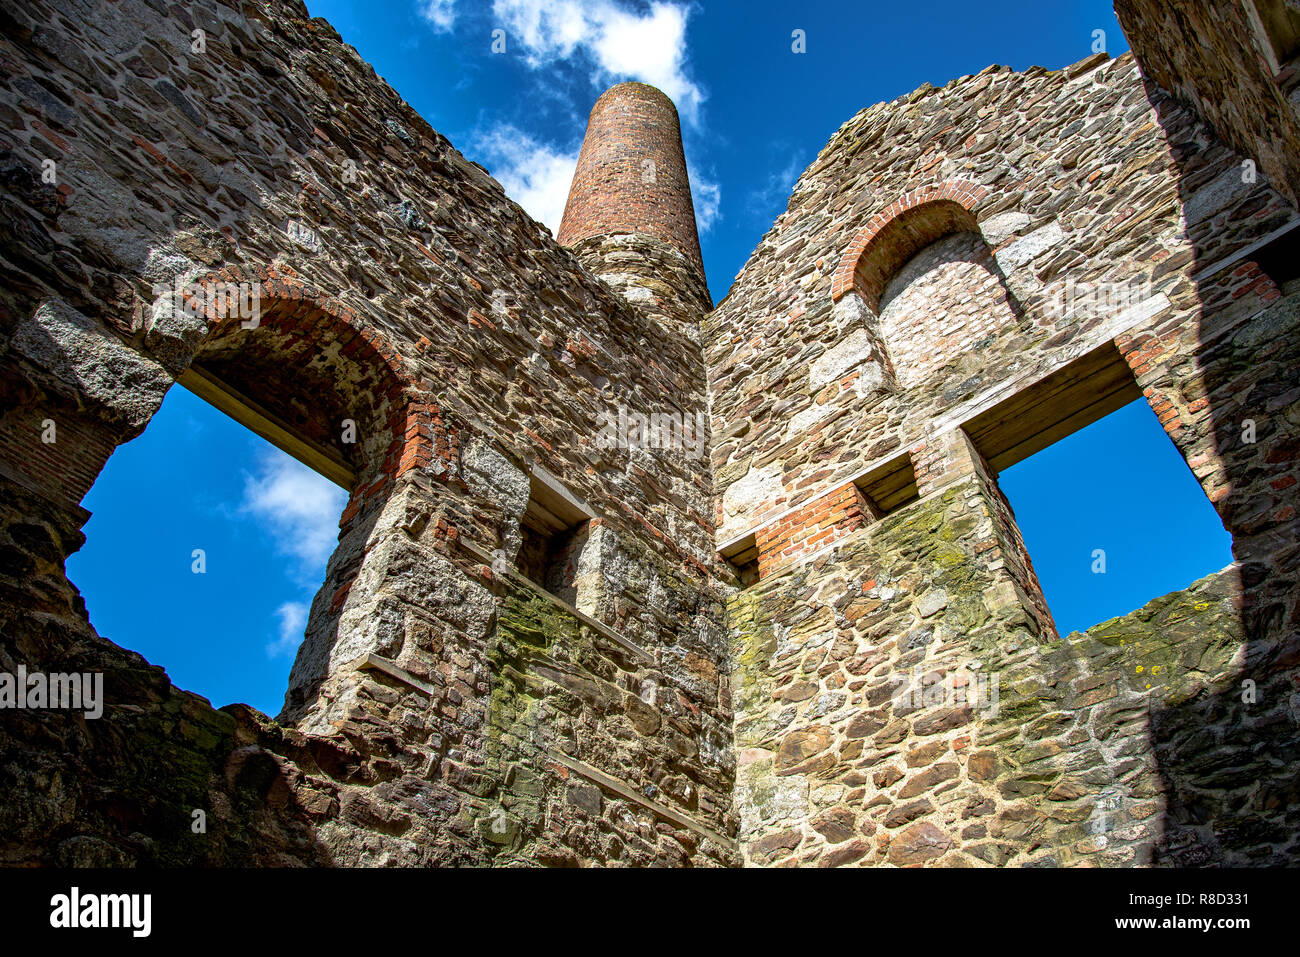 View from inside traditional Cornish engine house Cornwall UK Stock Photo